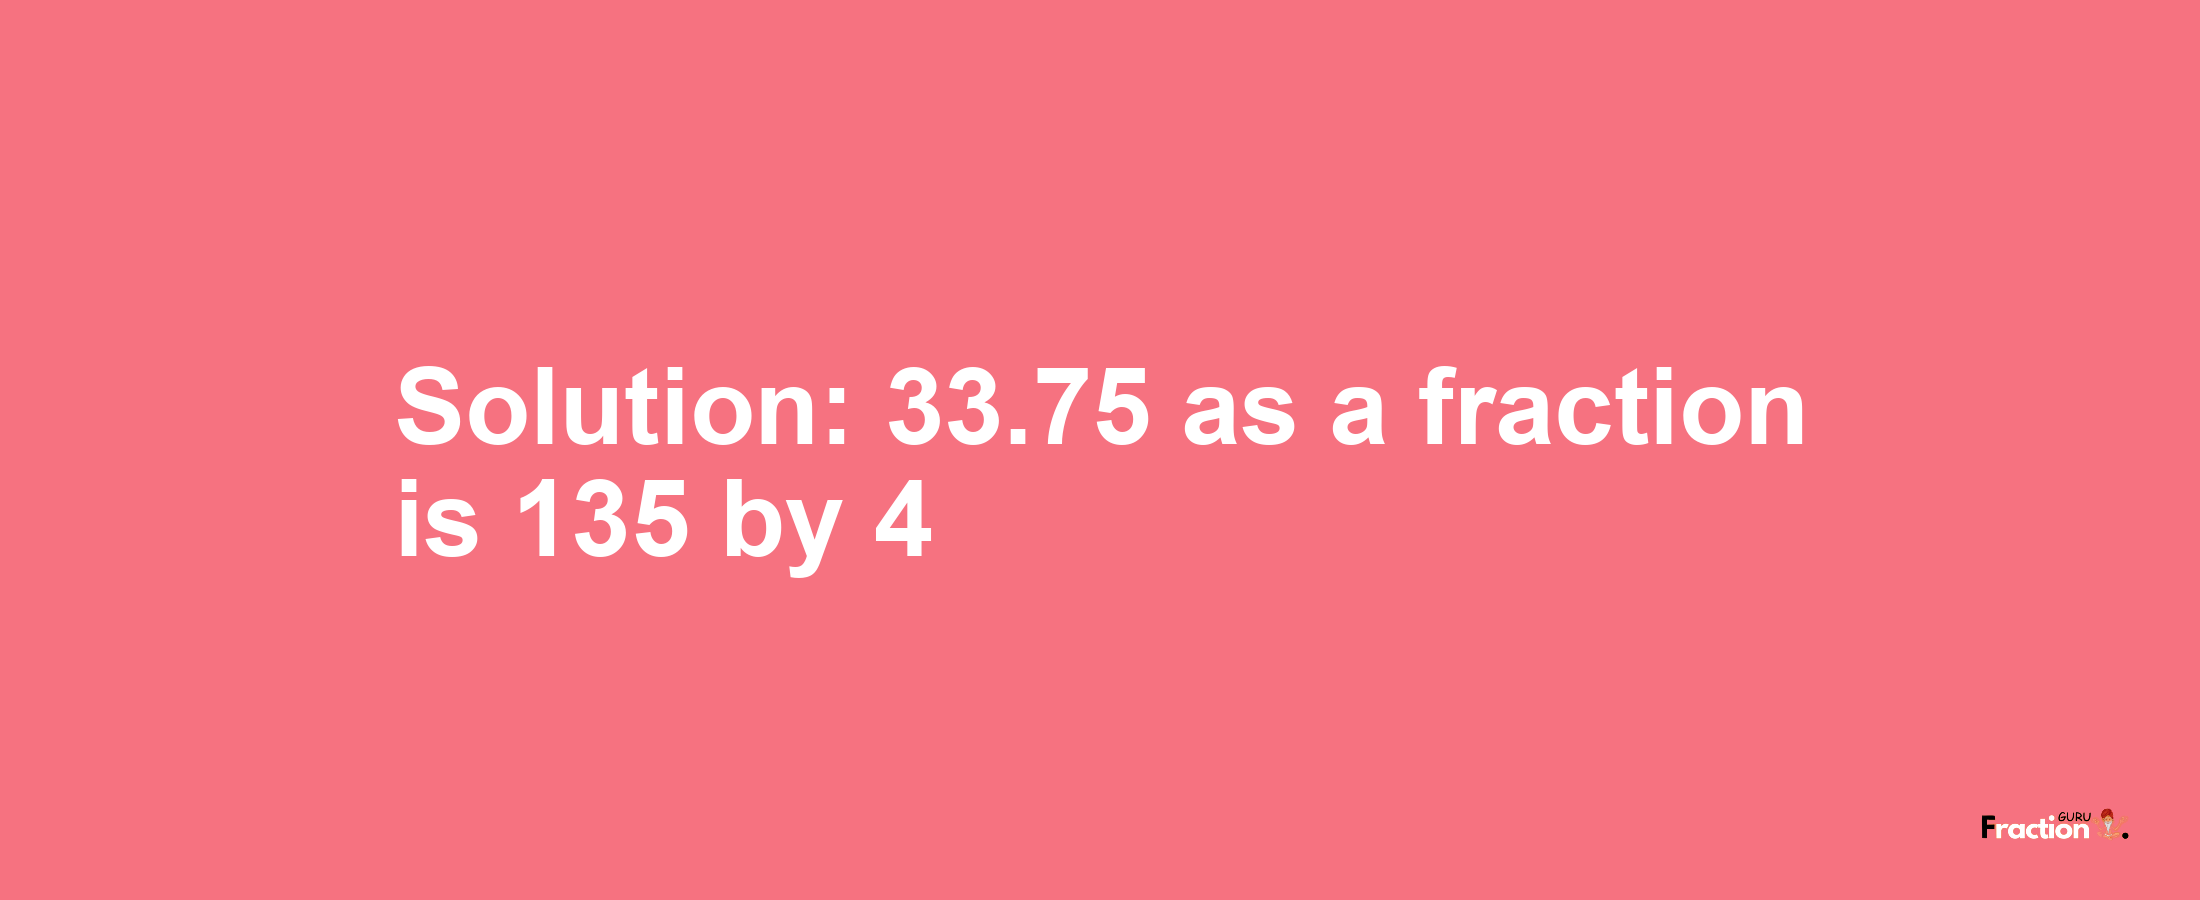 Solution:33.75 as a fraction is 135/4